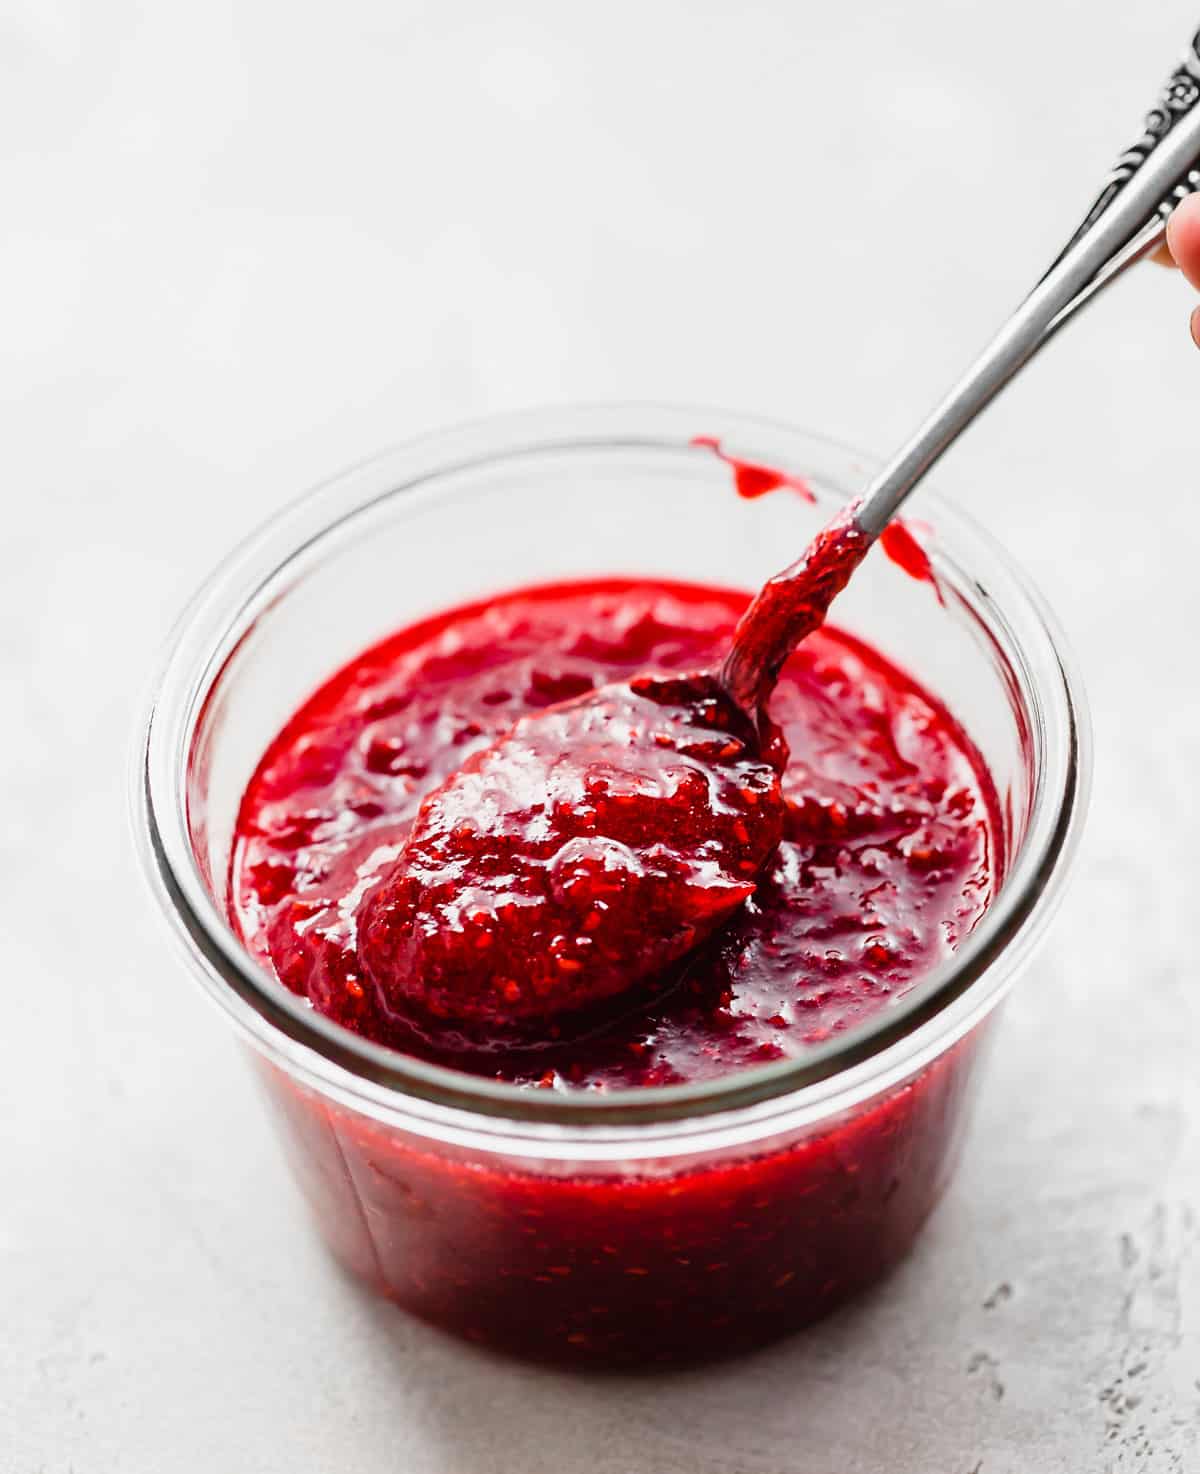 A glass jar filled with Raspberry Freezer Jam and a spoon scooping some out.